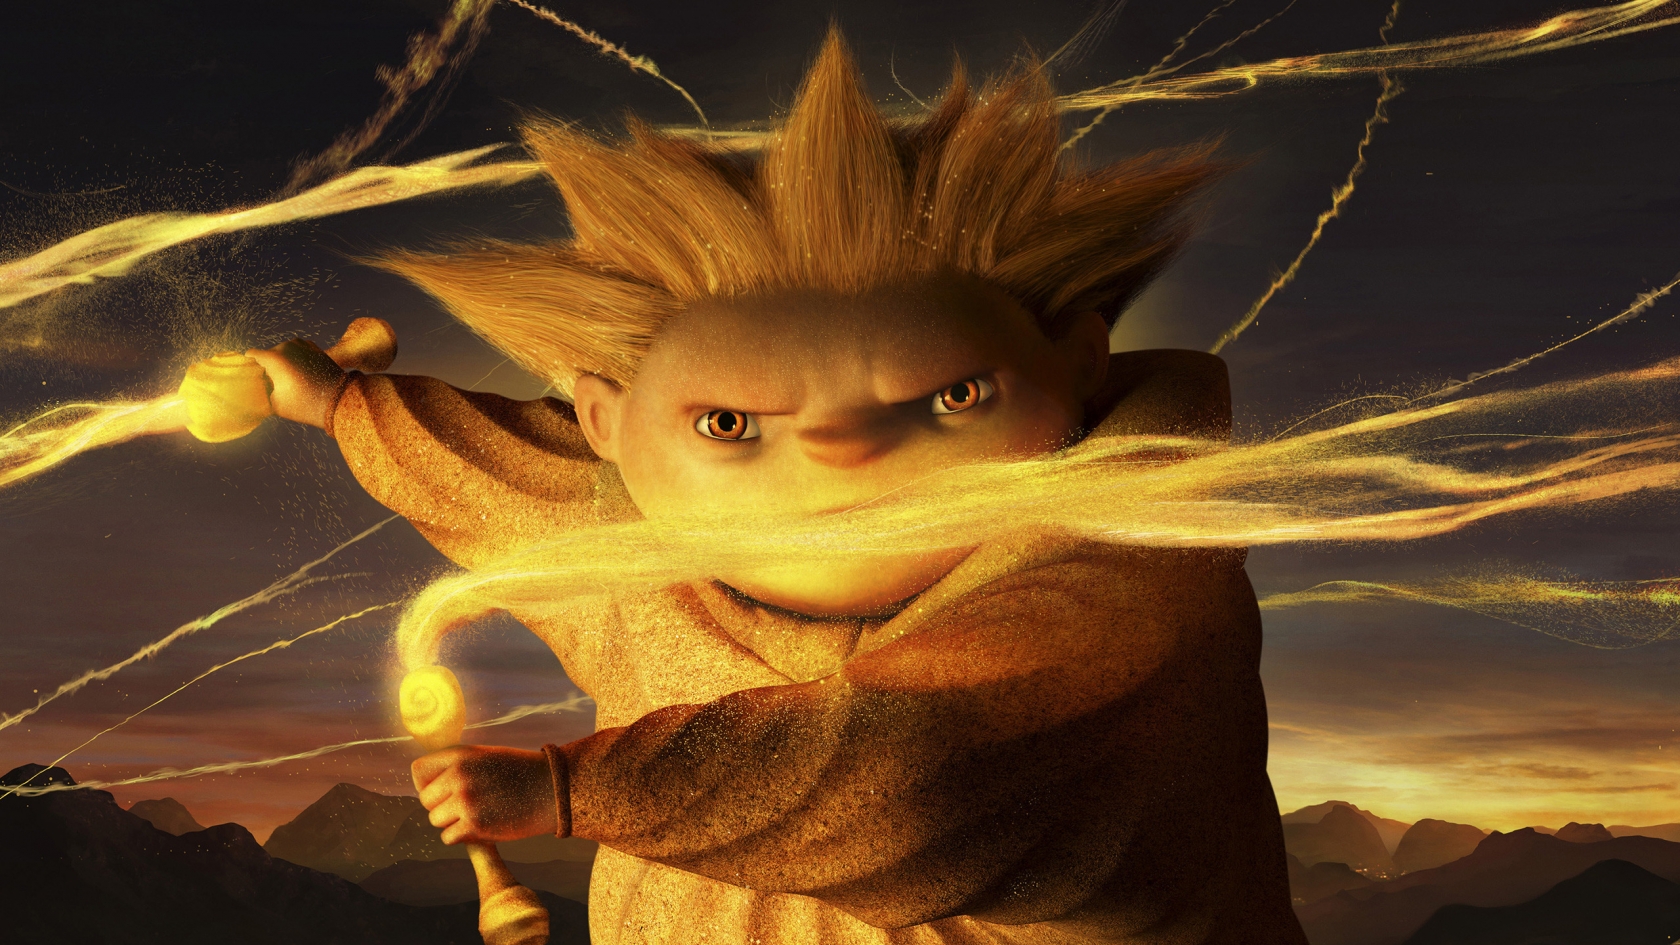 The Sandman Rise Of The Guardians for 1680 x 945 HDTV resolution